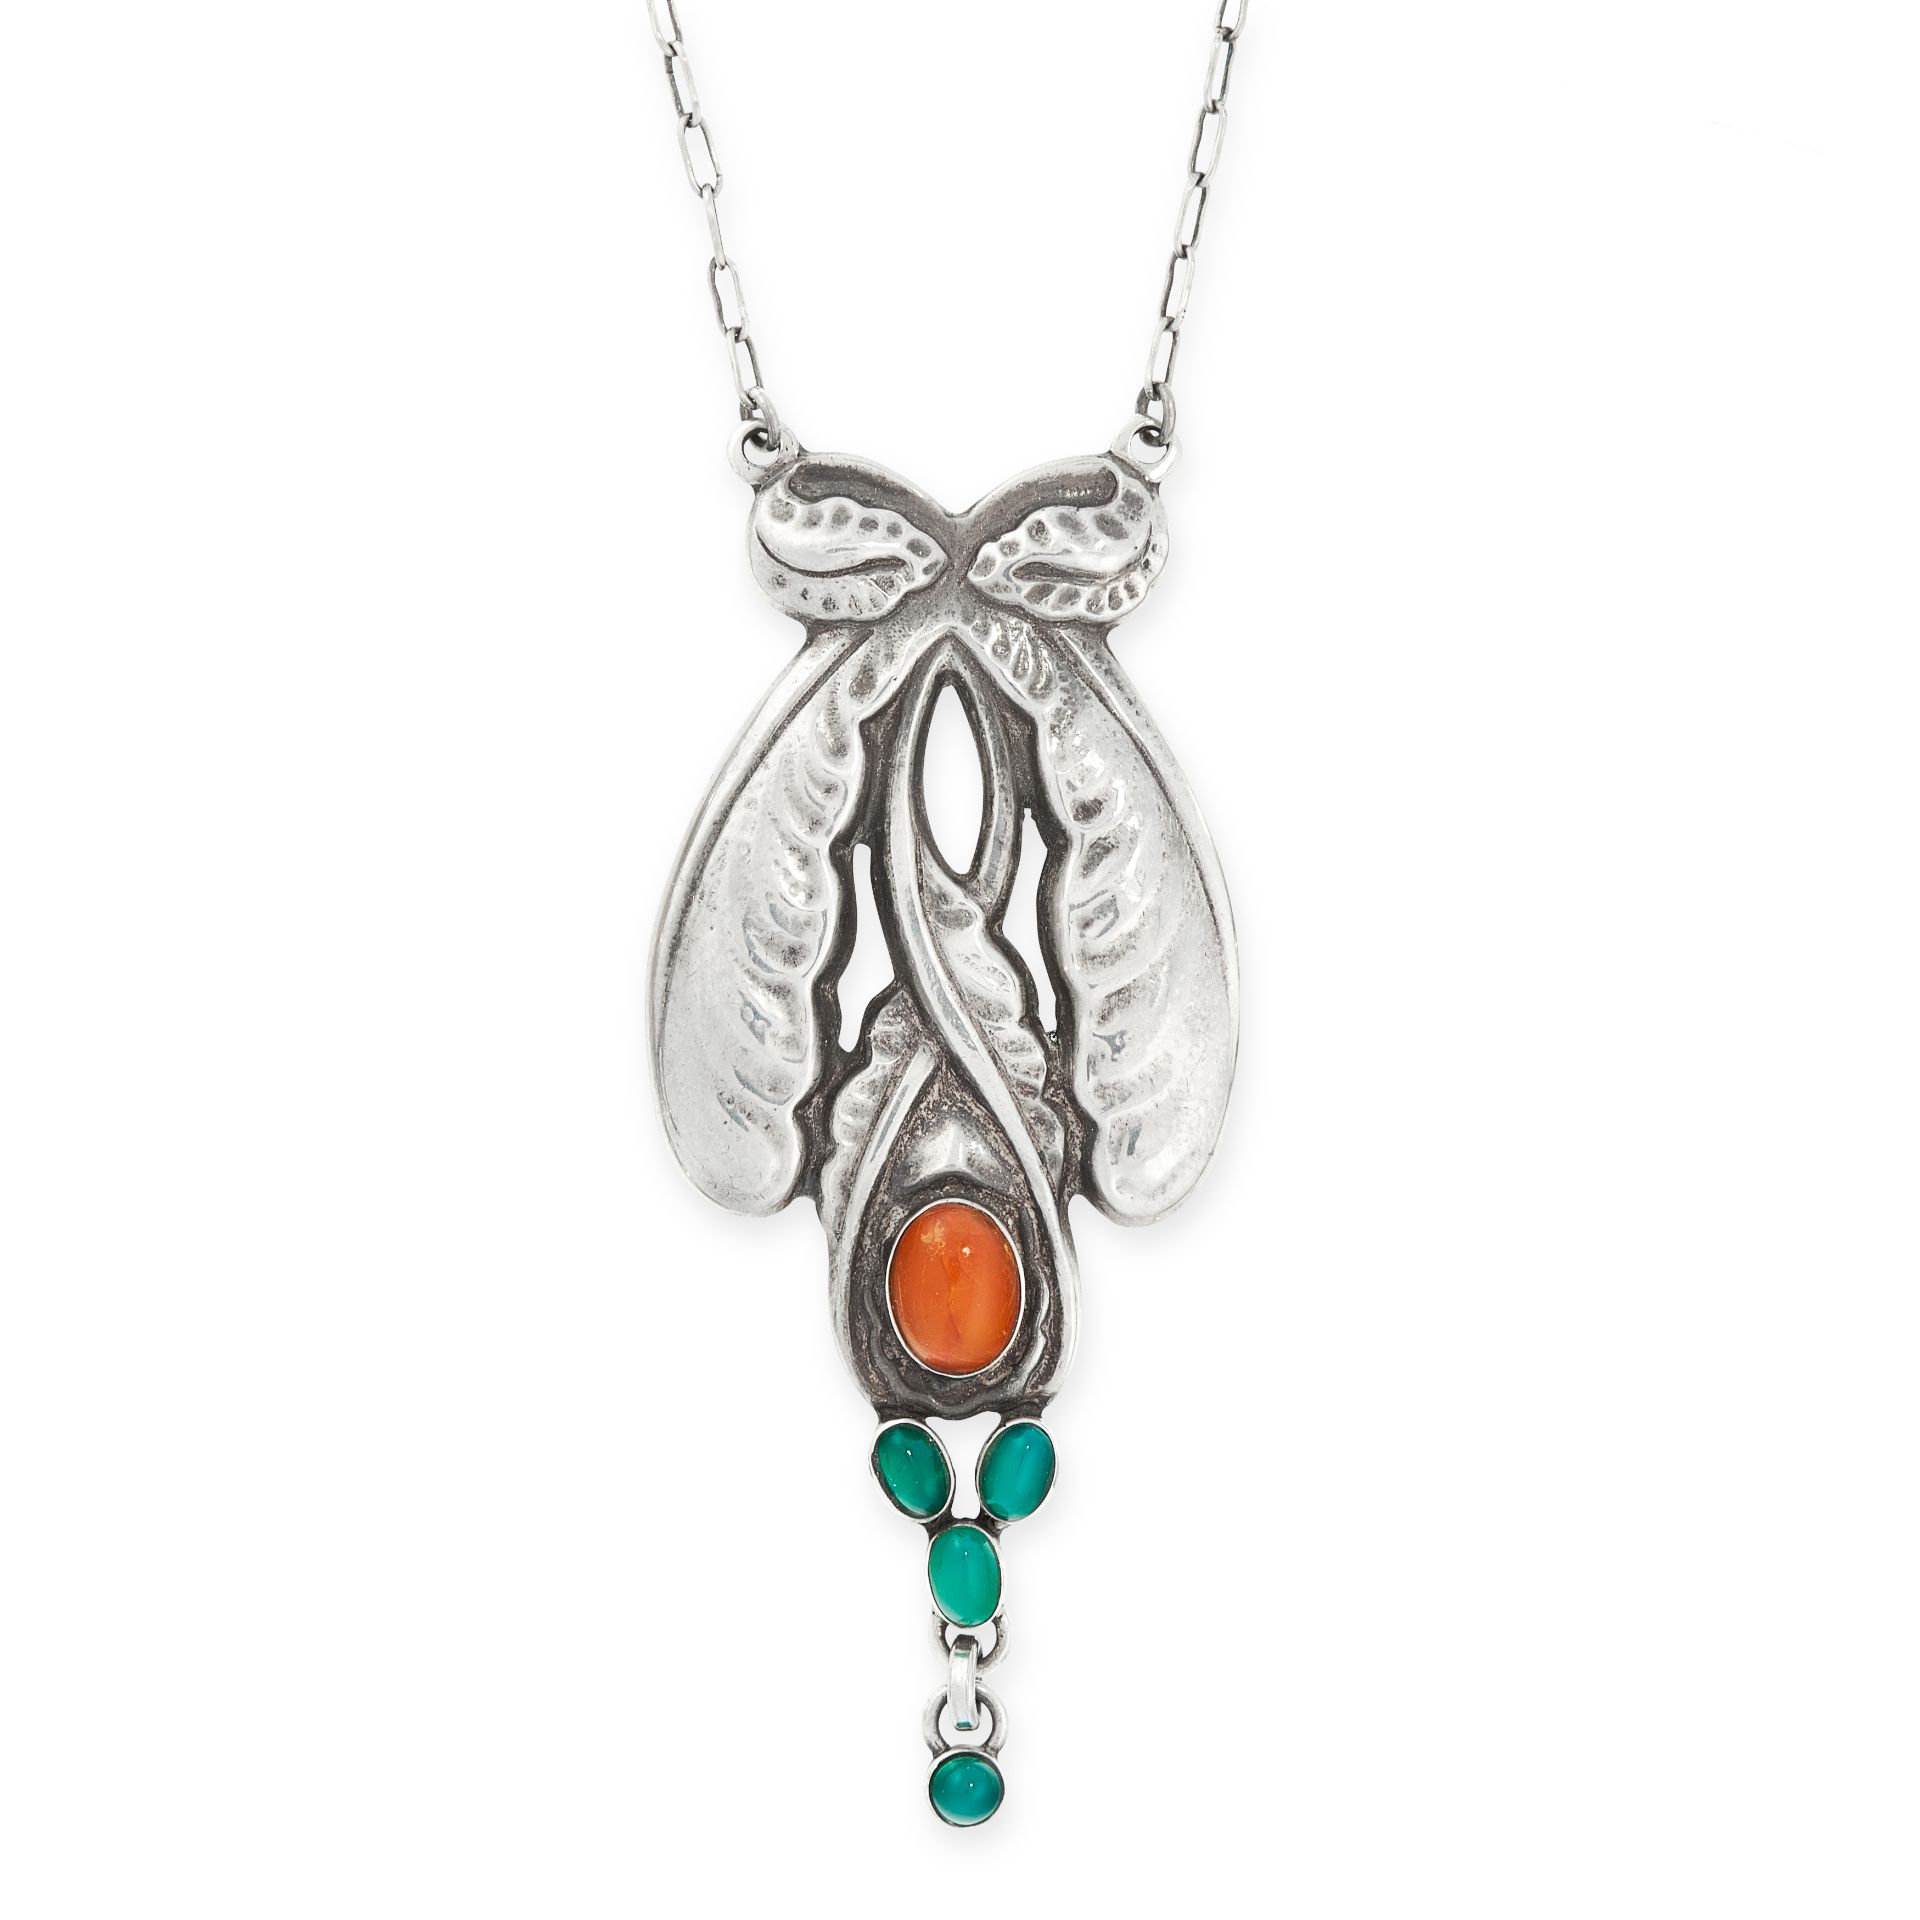 AN AMBER AND CHRYSOPRASE PENDANT NECKLACE, GEORG JENSEN 1933-1944 in silver, design number 3, the